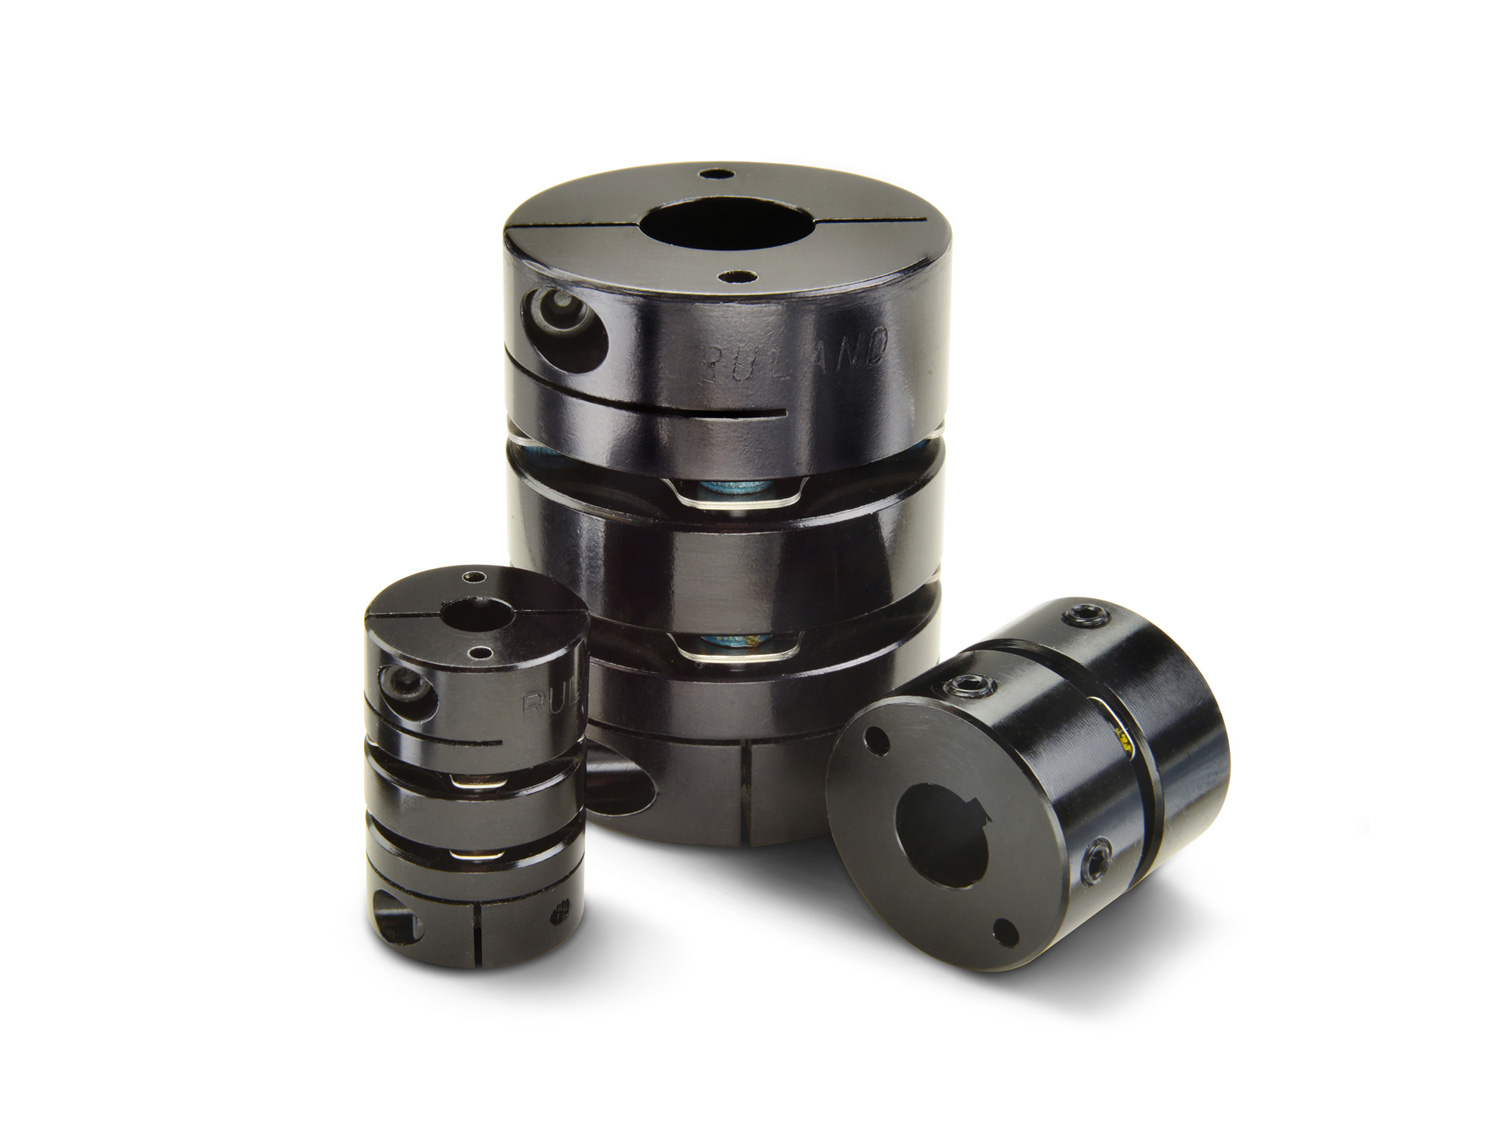 Disc couplings from Ruland in single and double disc styles and in clamp screw and set screw designs